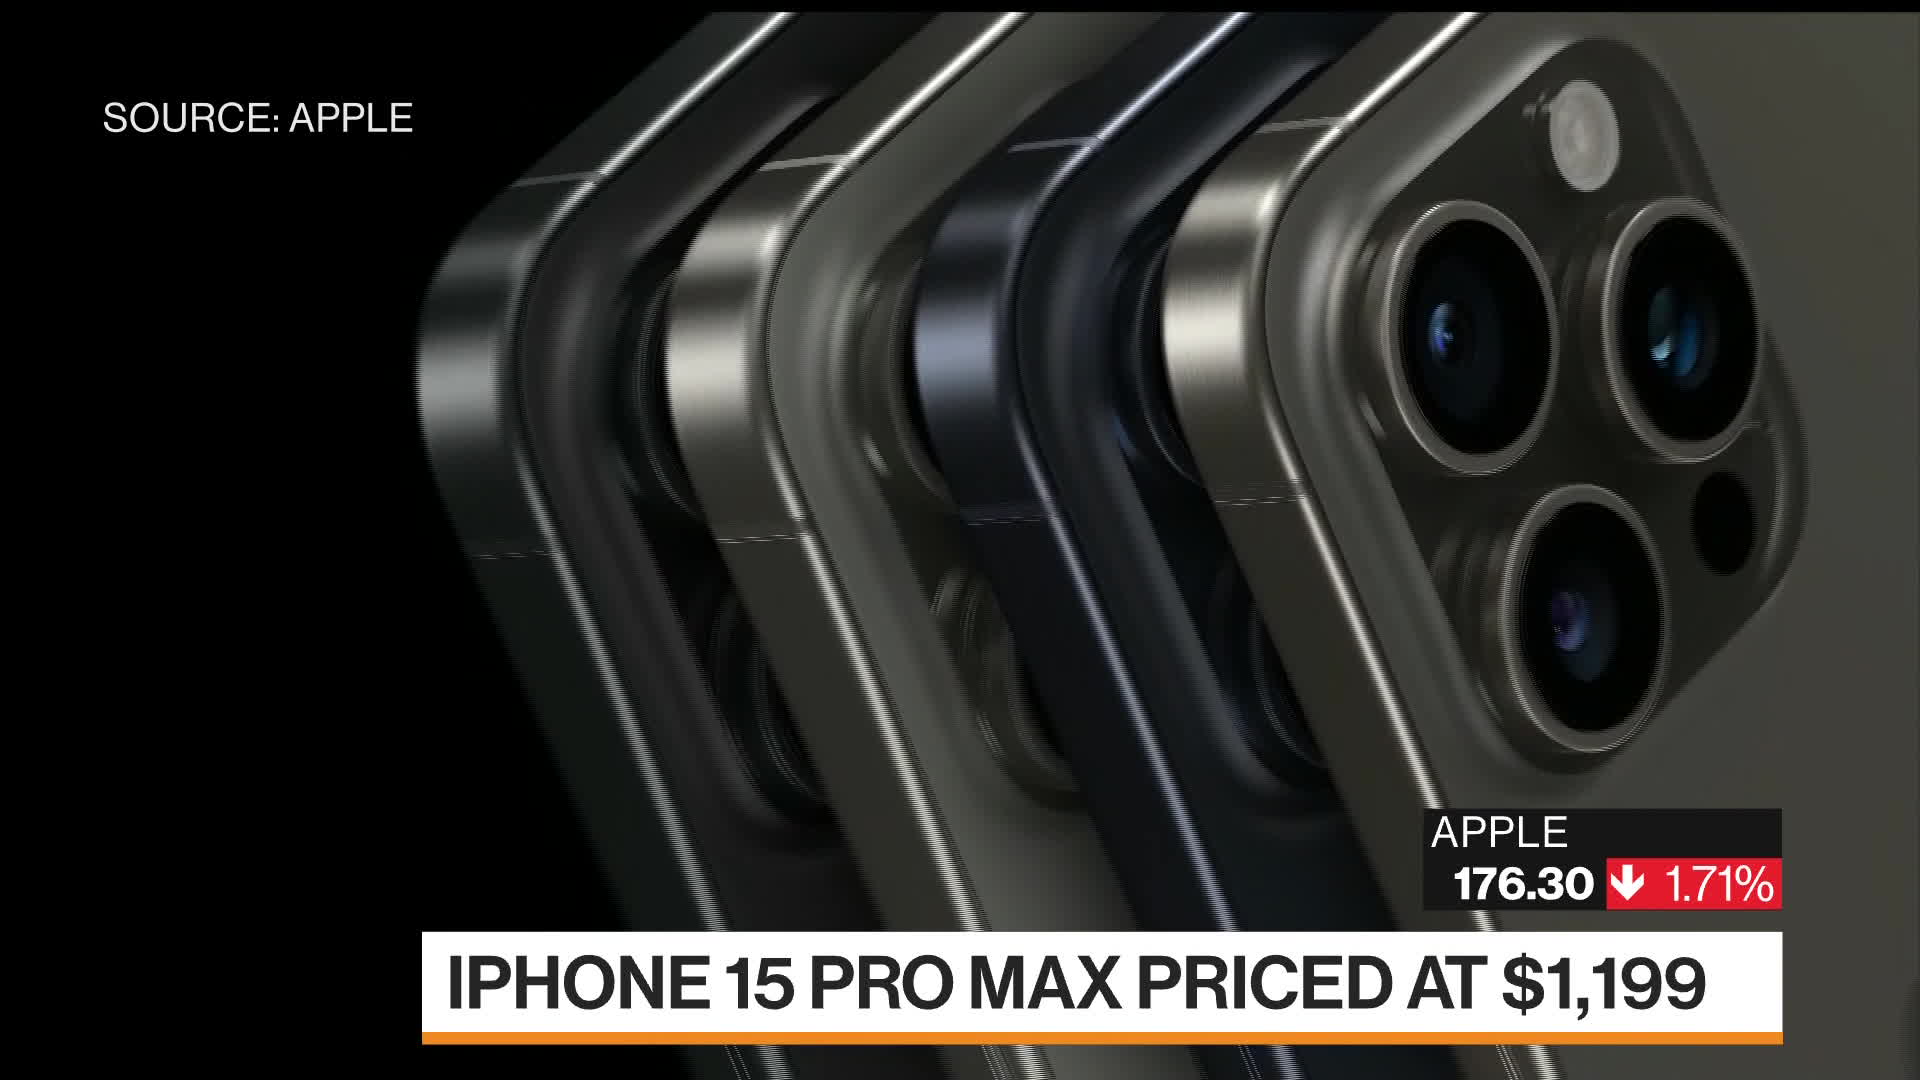 Apple's iPhone 15 Pro Max Starts at $1,199, but You Can't Get